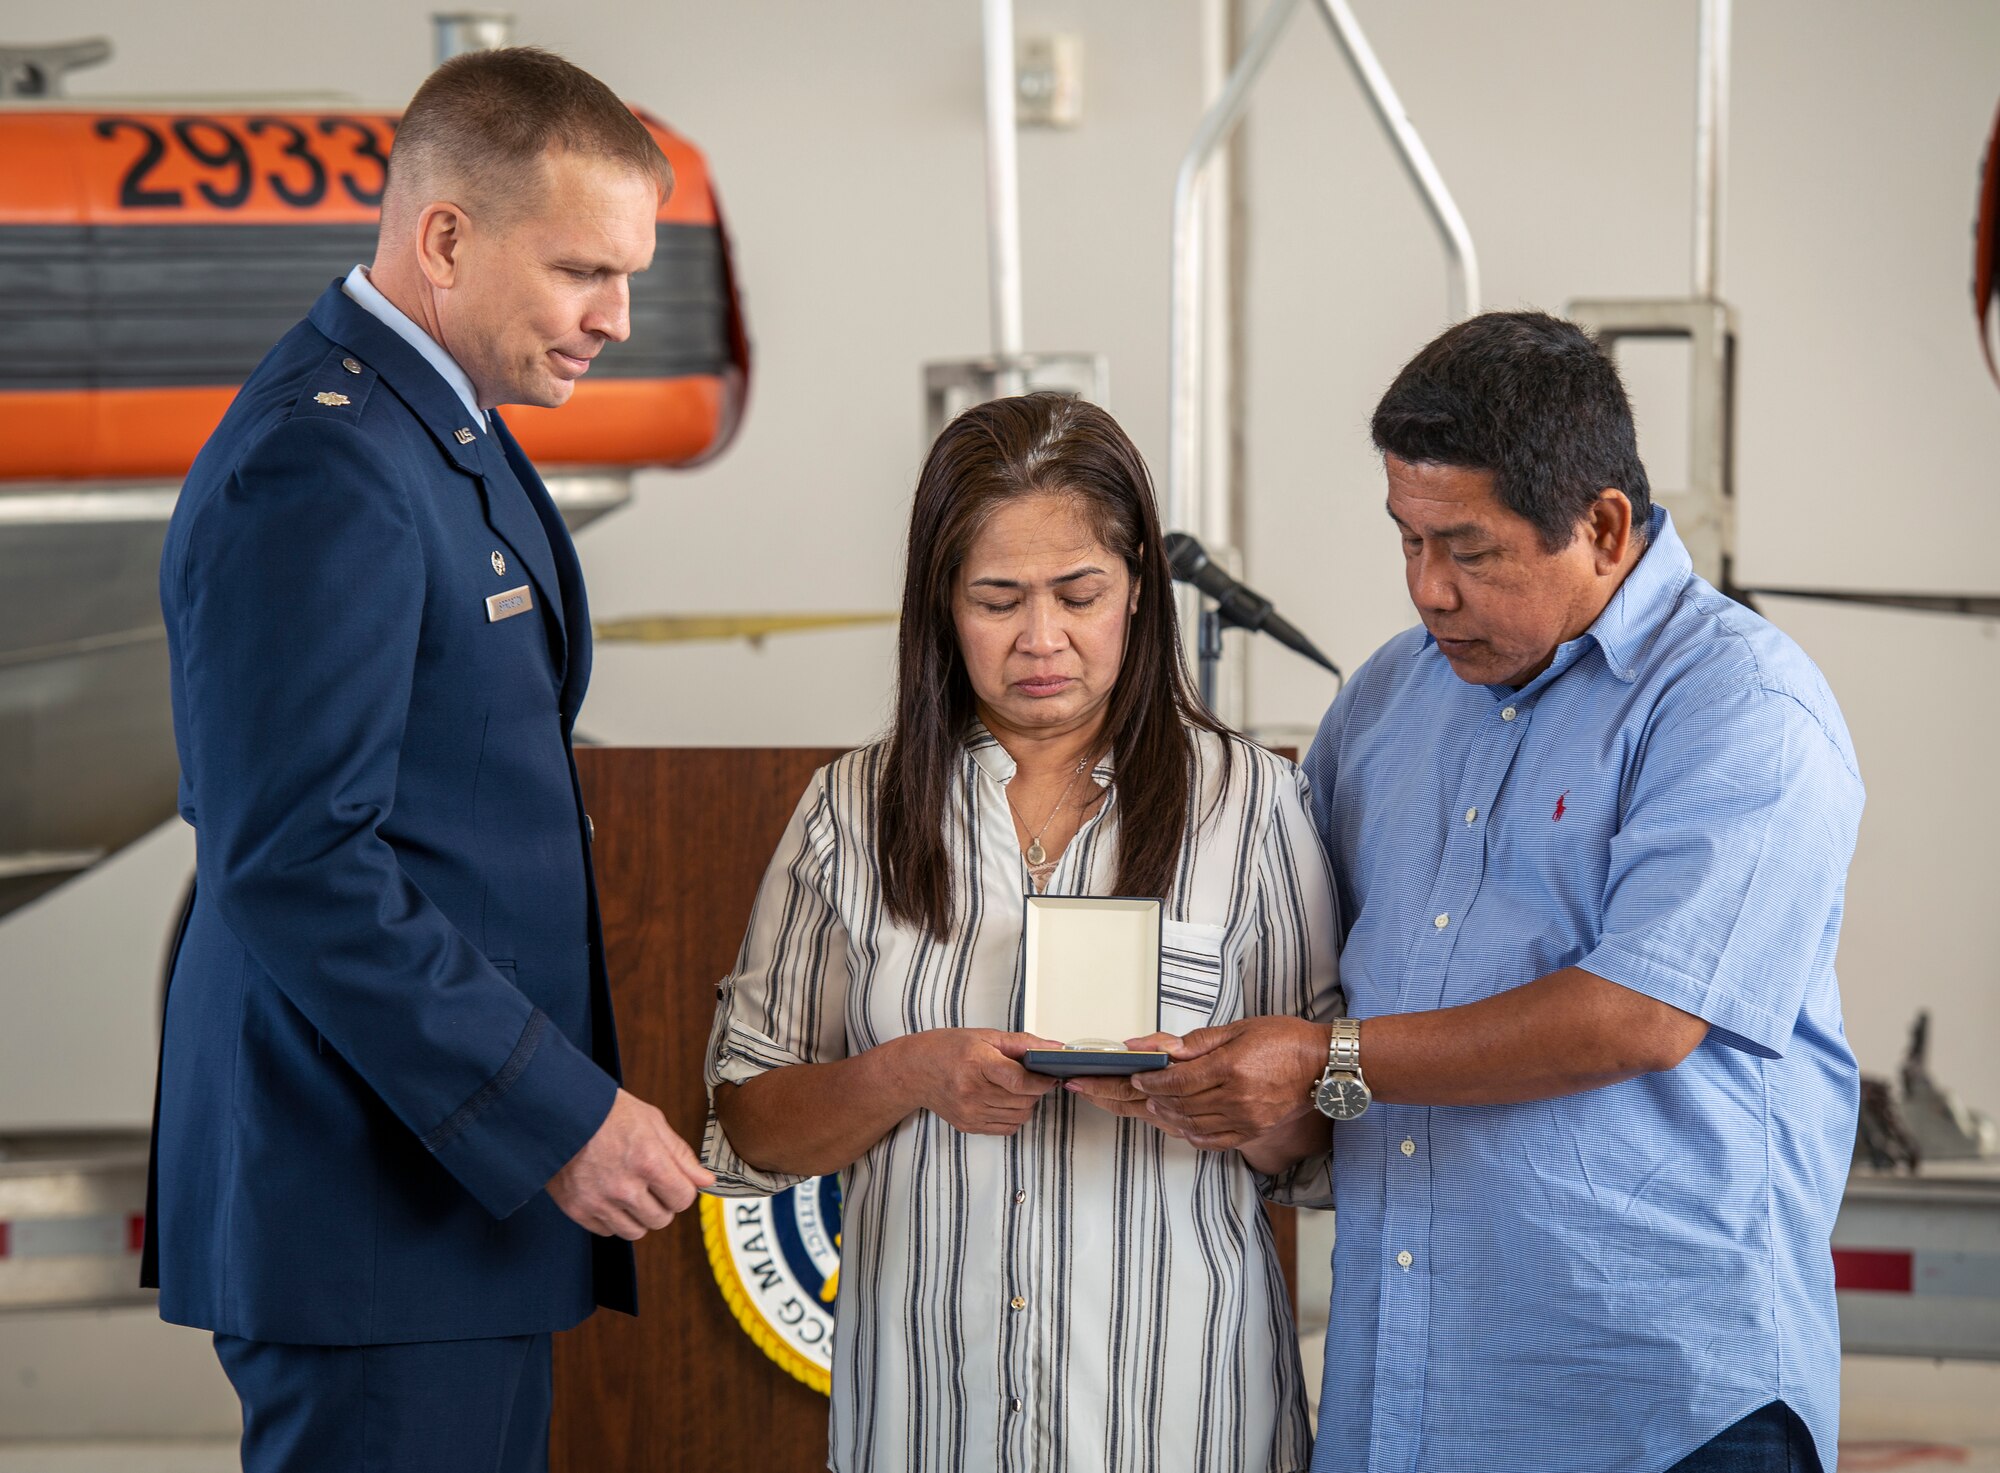 Jessica Reyes Posana and Erneto Posana accept the Airman’s Medal on behalf of their son, Elijah Posana, during a ceremony at Coast Guard Marine Safety Security Team Houston, Texas, April 26, 2022. Air Force Lt. Col. Devin L. Sproston, commander of the 509th Security Forces Squadron at Whiteman Air Force Base, Missouri, presented the medal and lauded Posana’s heroic rescue of his cousins from a rip current on Surfside Beach, Texas, May 2, 2021. (U.S. Coast Guard photo by Petty Officer 1st Class Corinne Zilnicki)